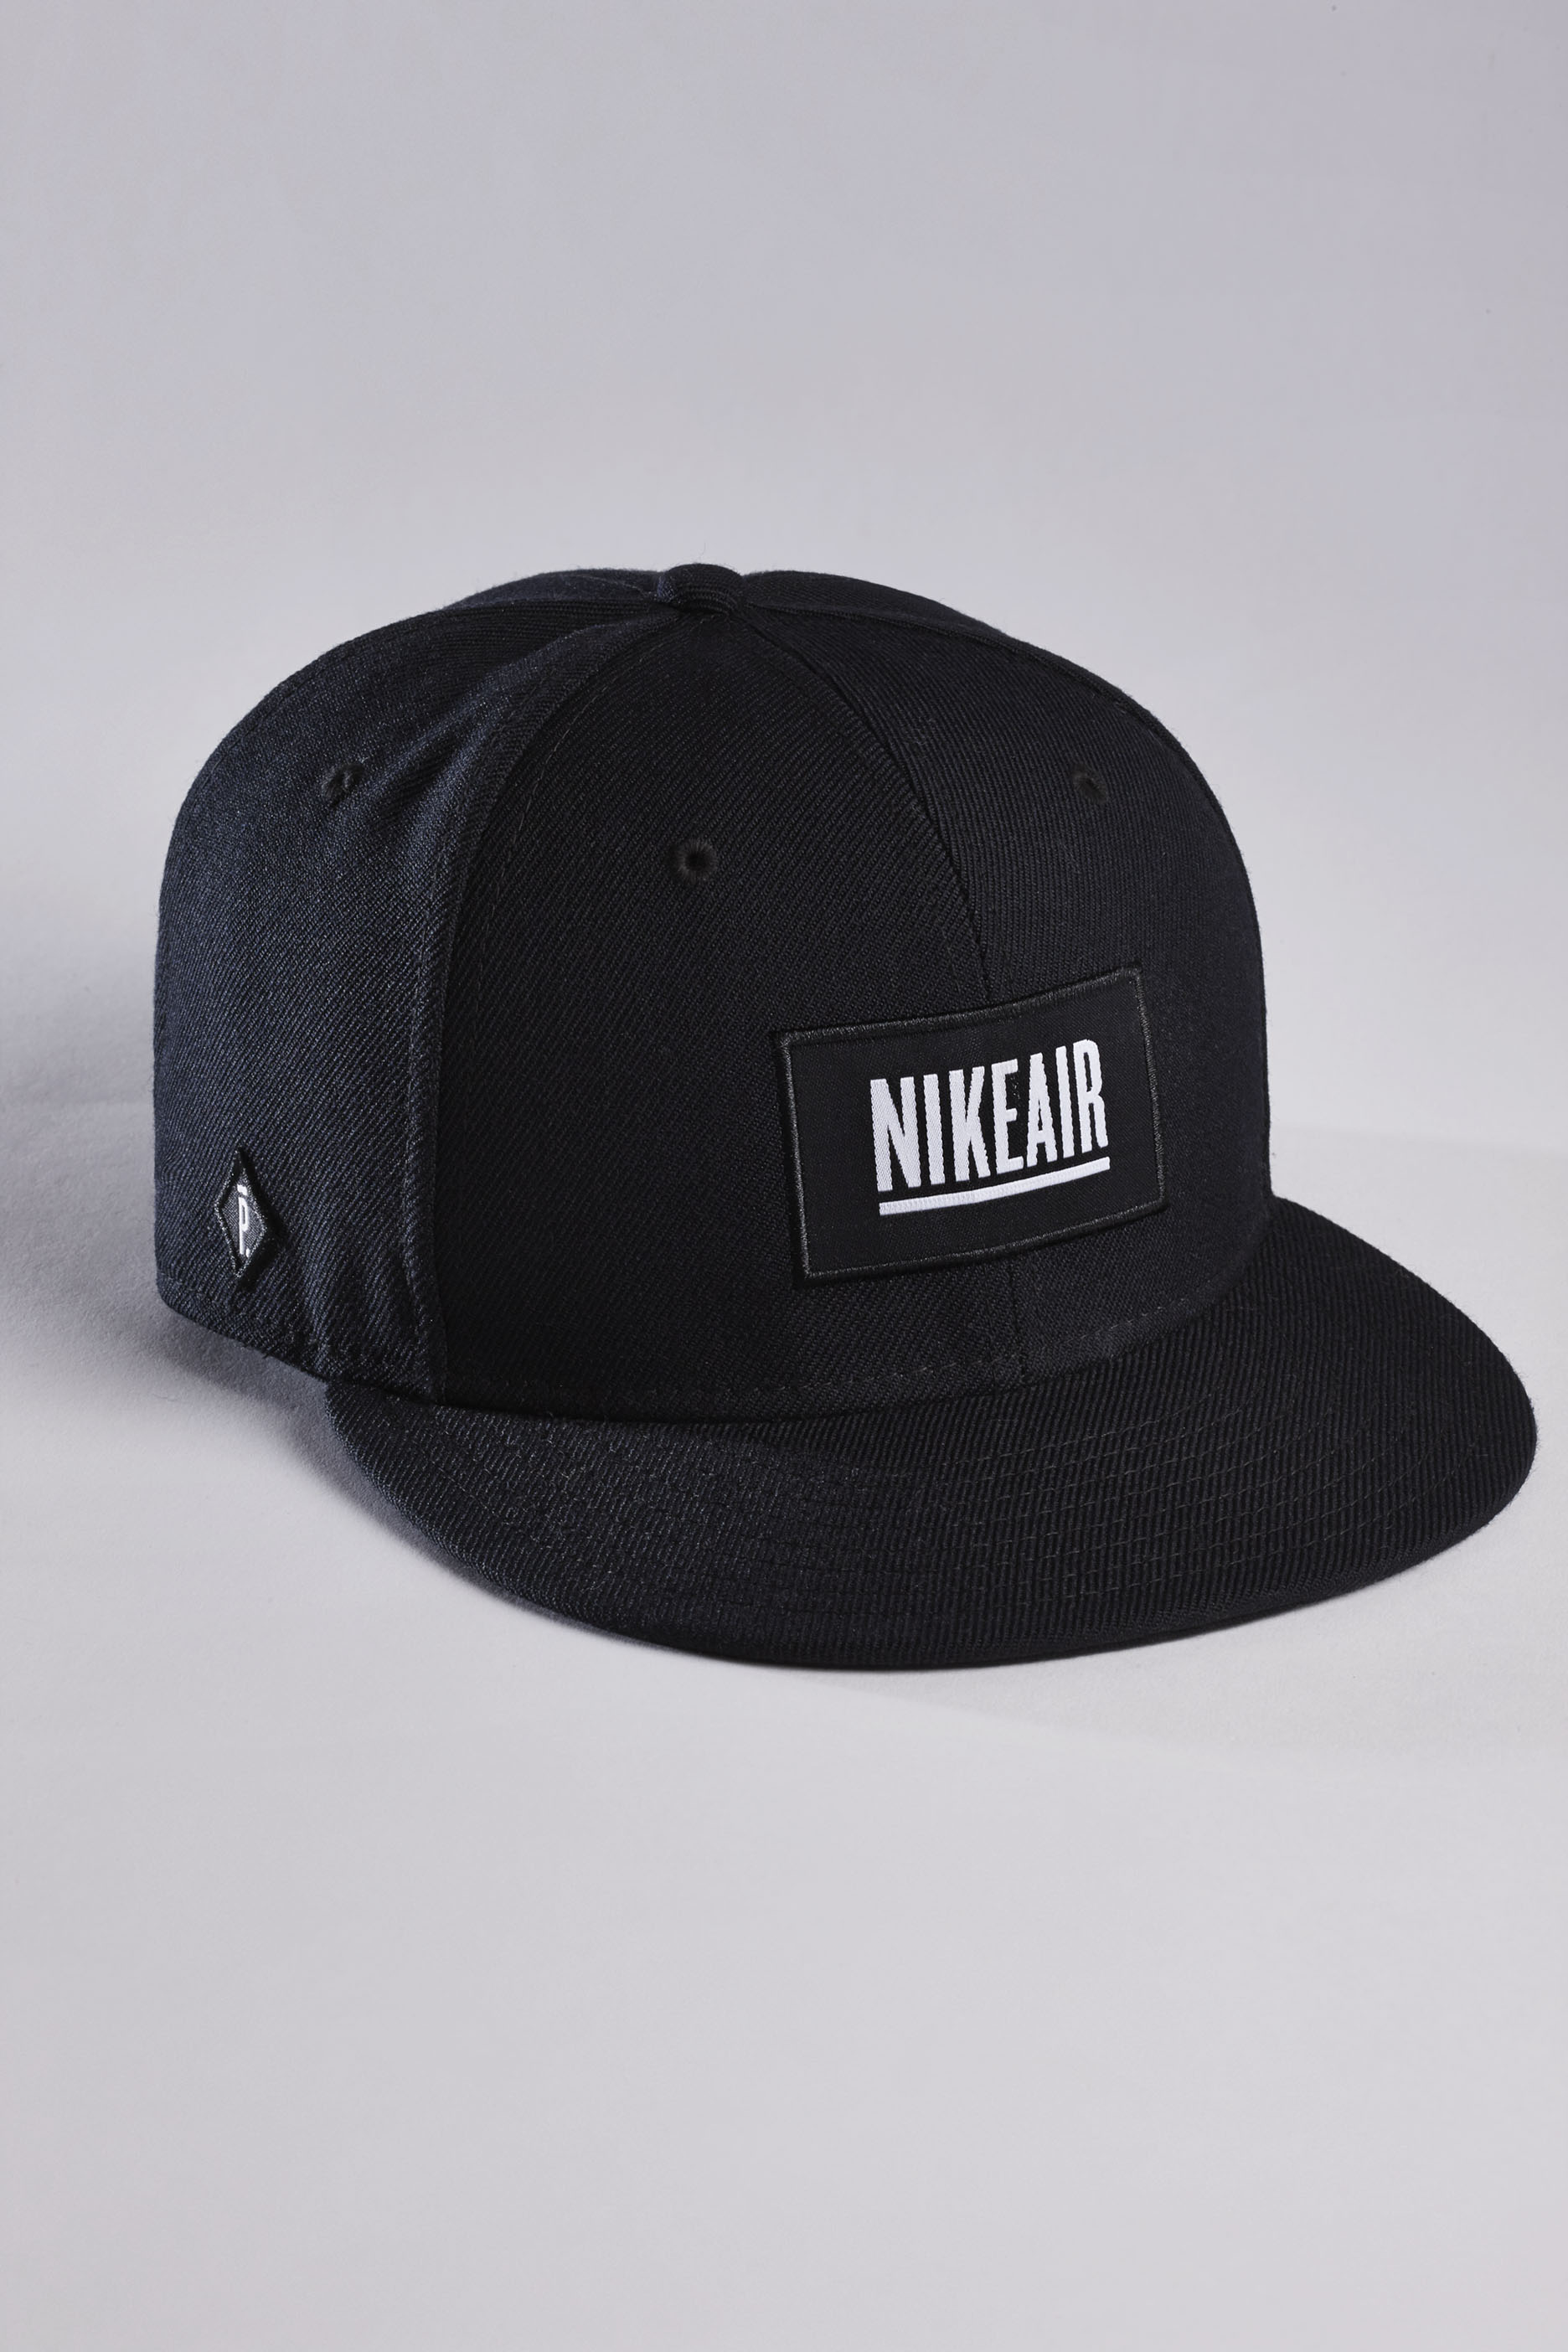 1397590290_nike_pigalle_hat